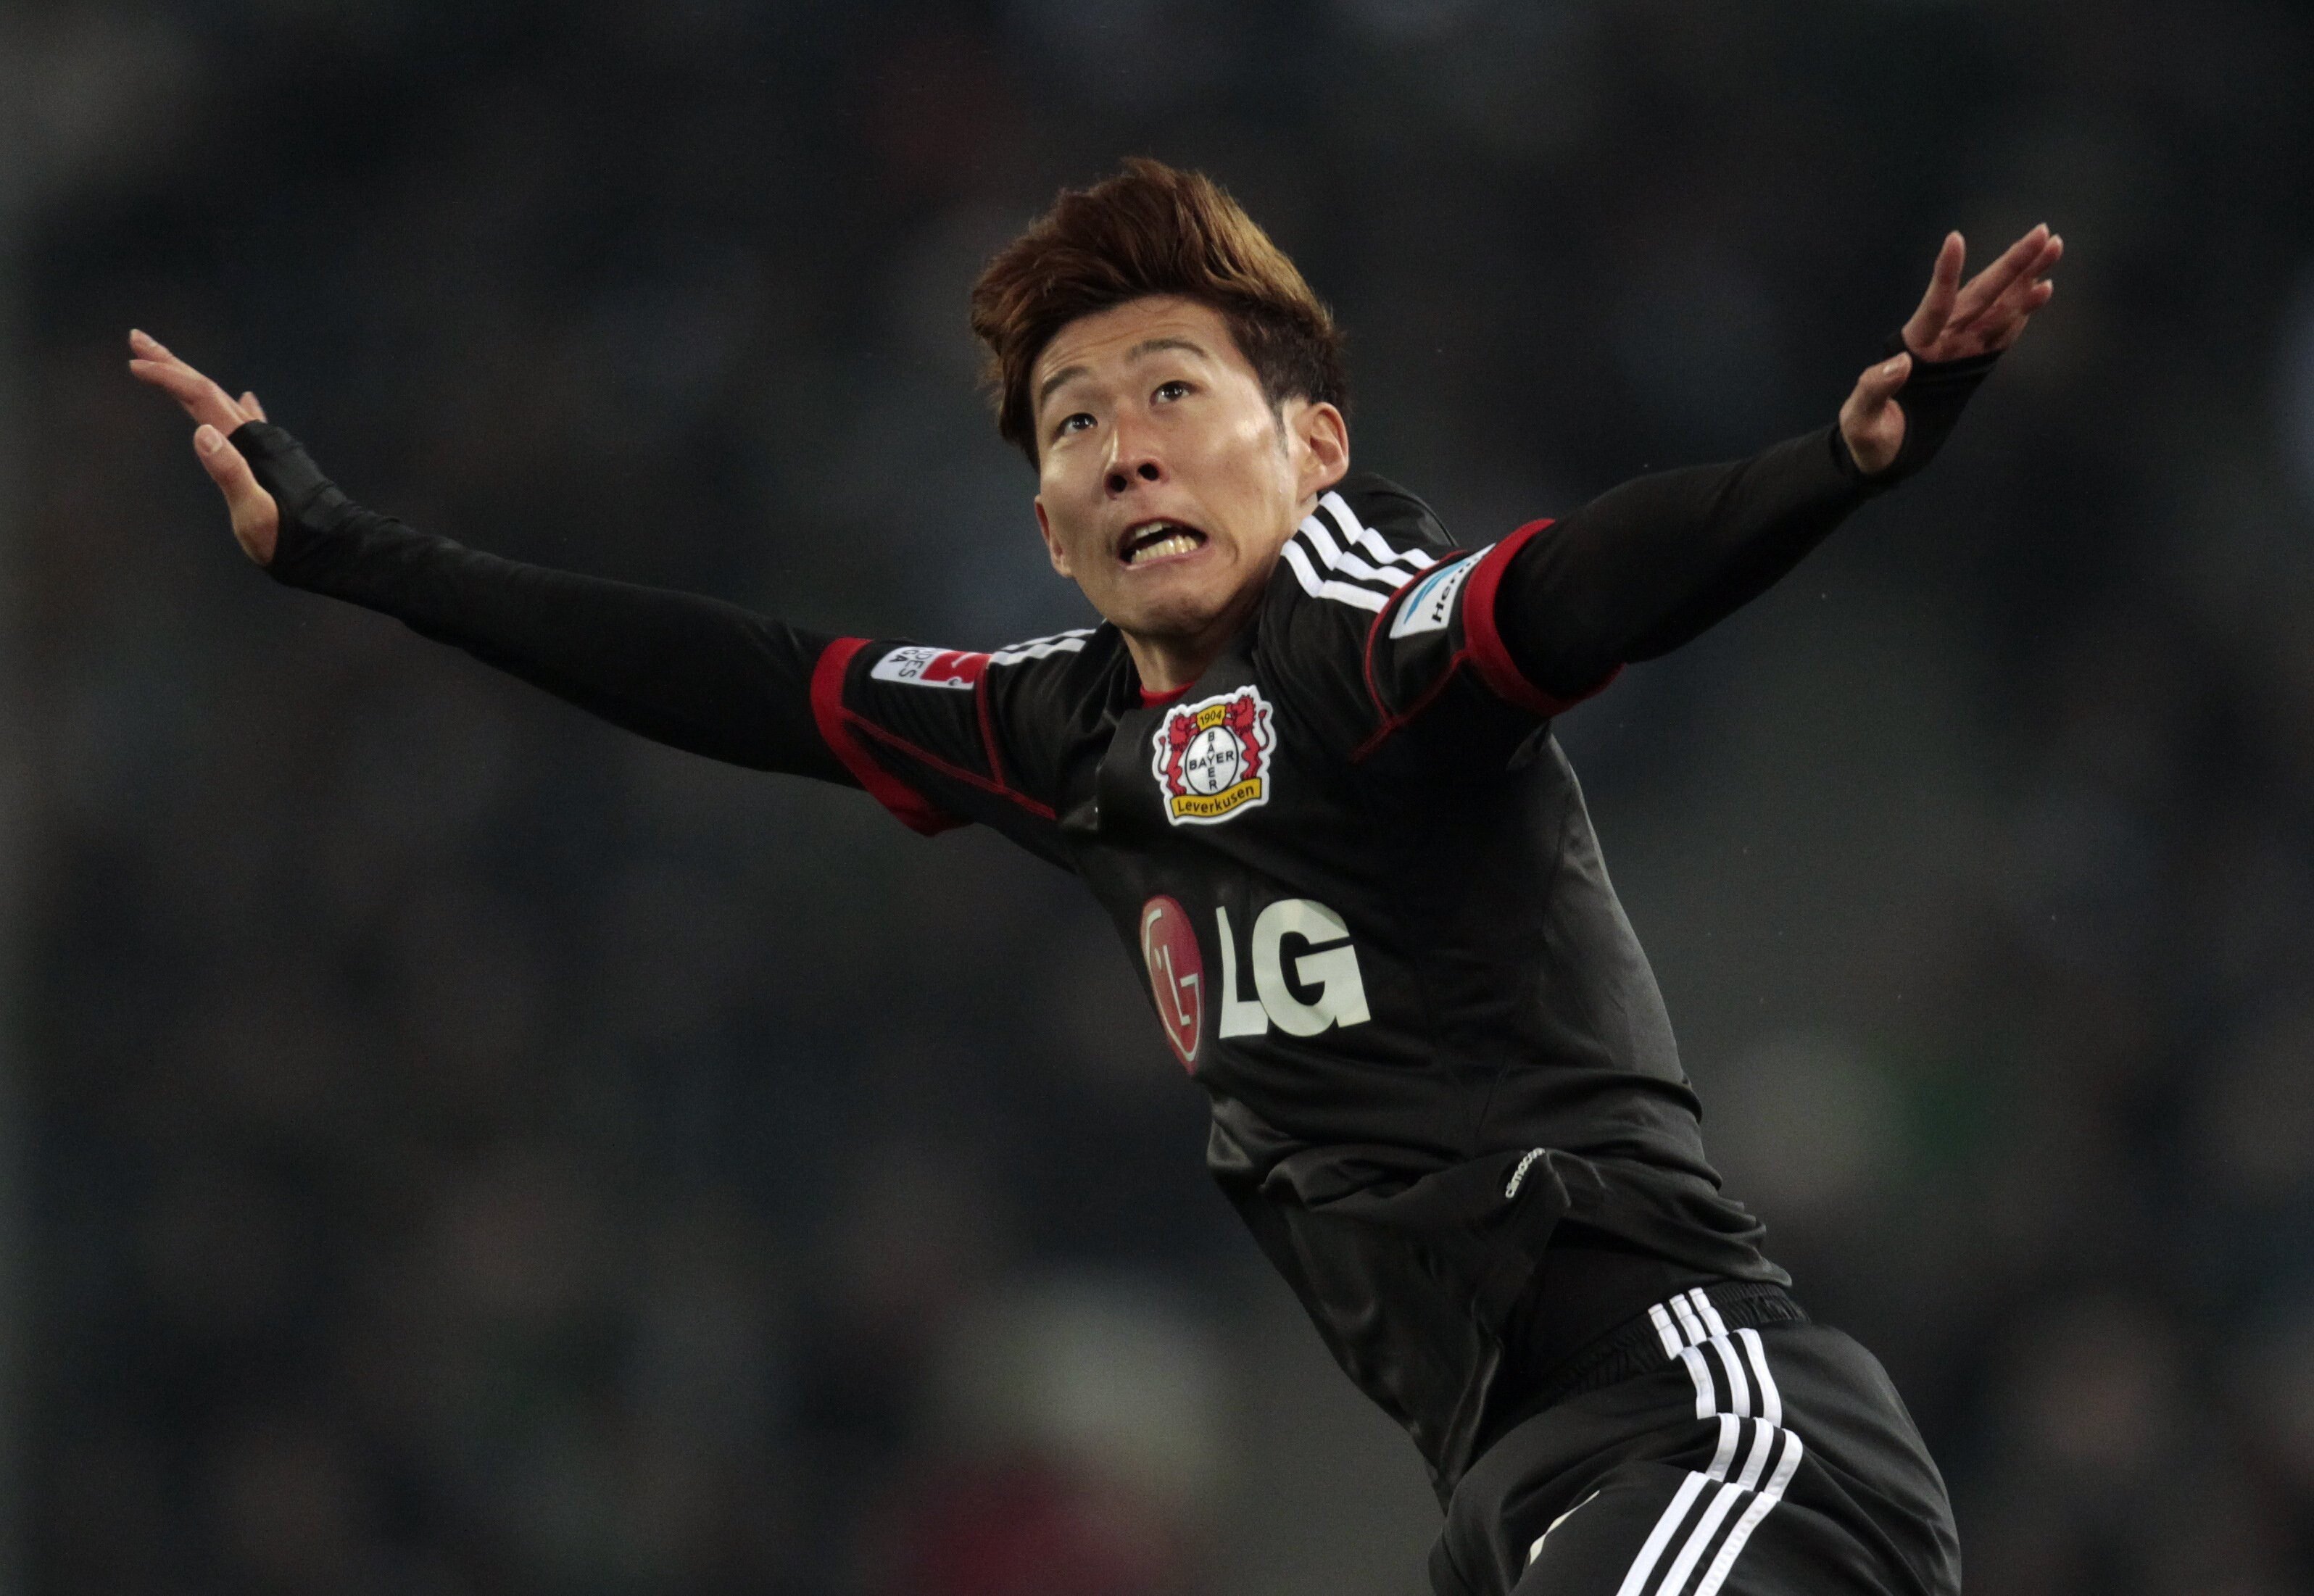 South Korea’s Son Heung-min in action for Bayer Leverkusen in the Bundesliga in 2014. Photo: Reuters